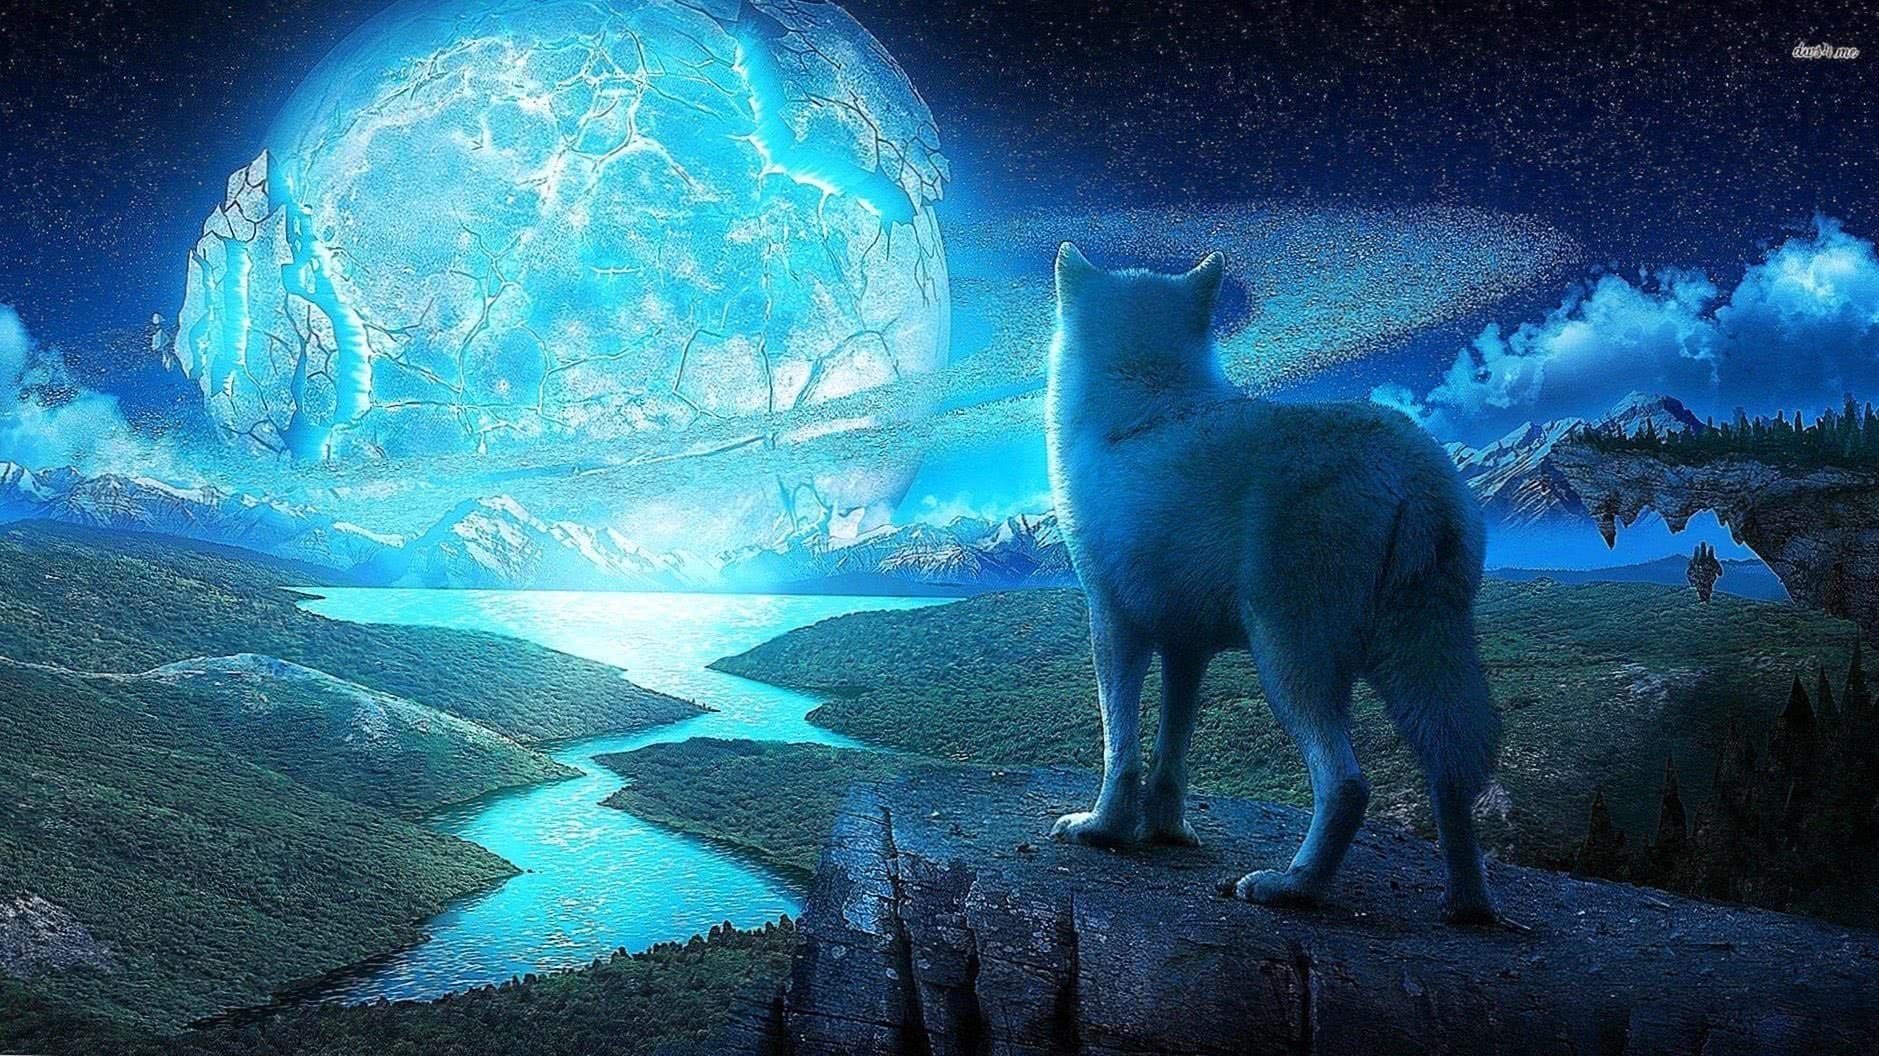 the wolf and the moon wallpaper hd background image 4